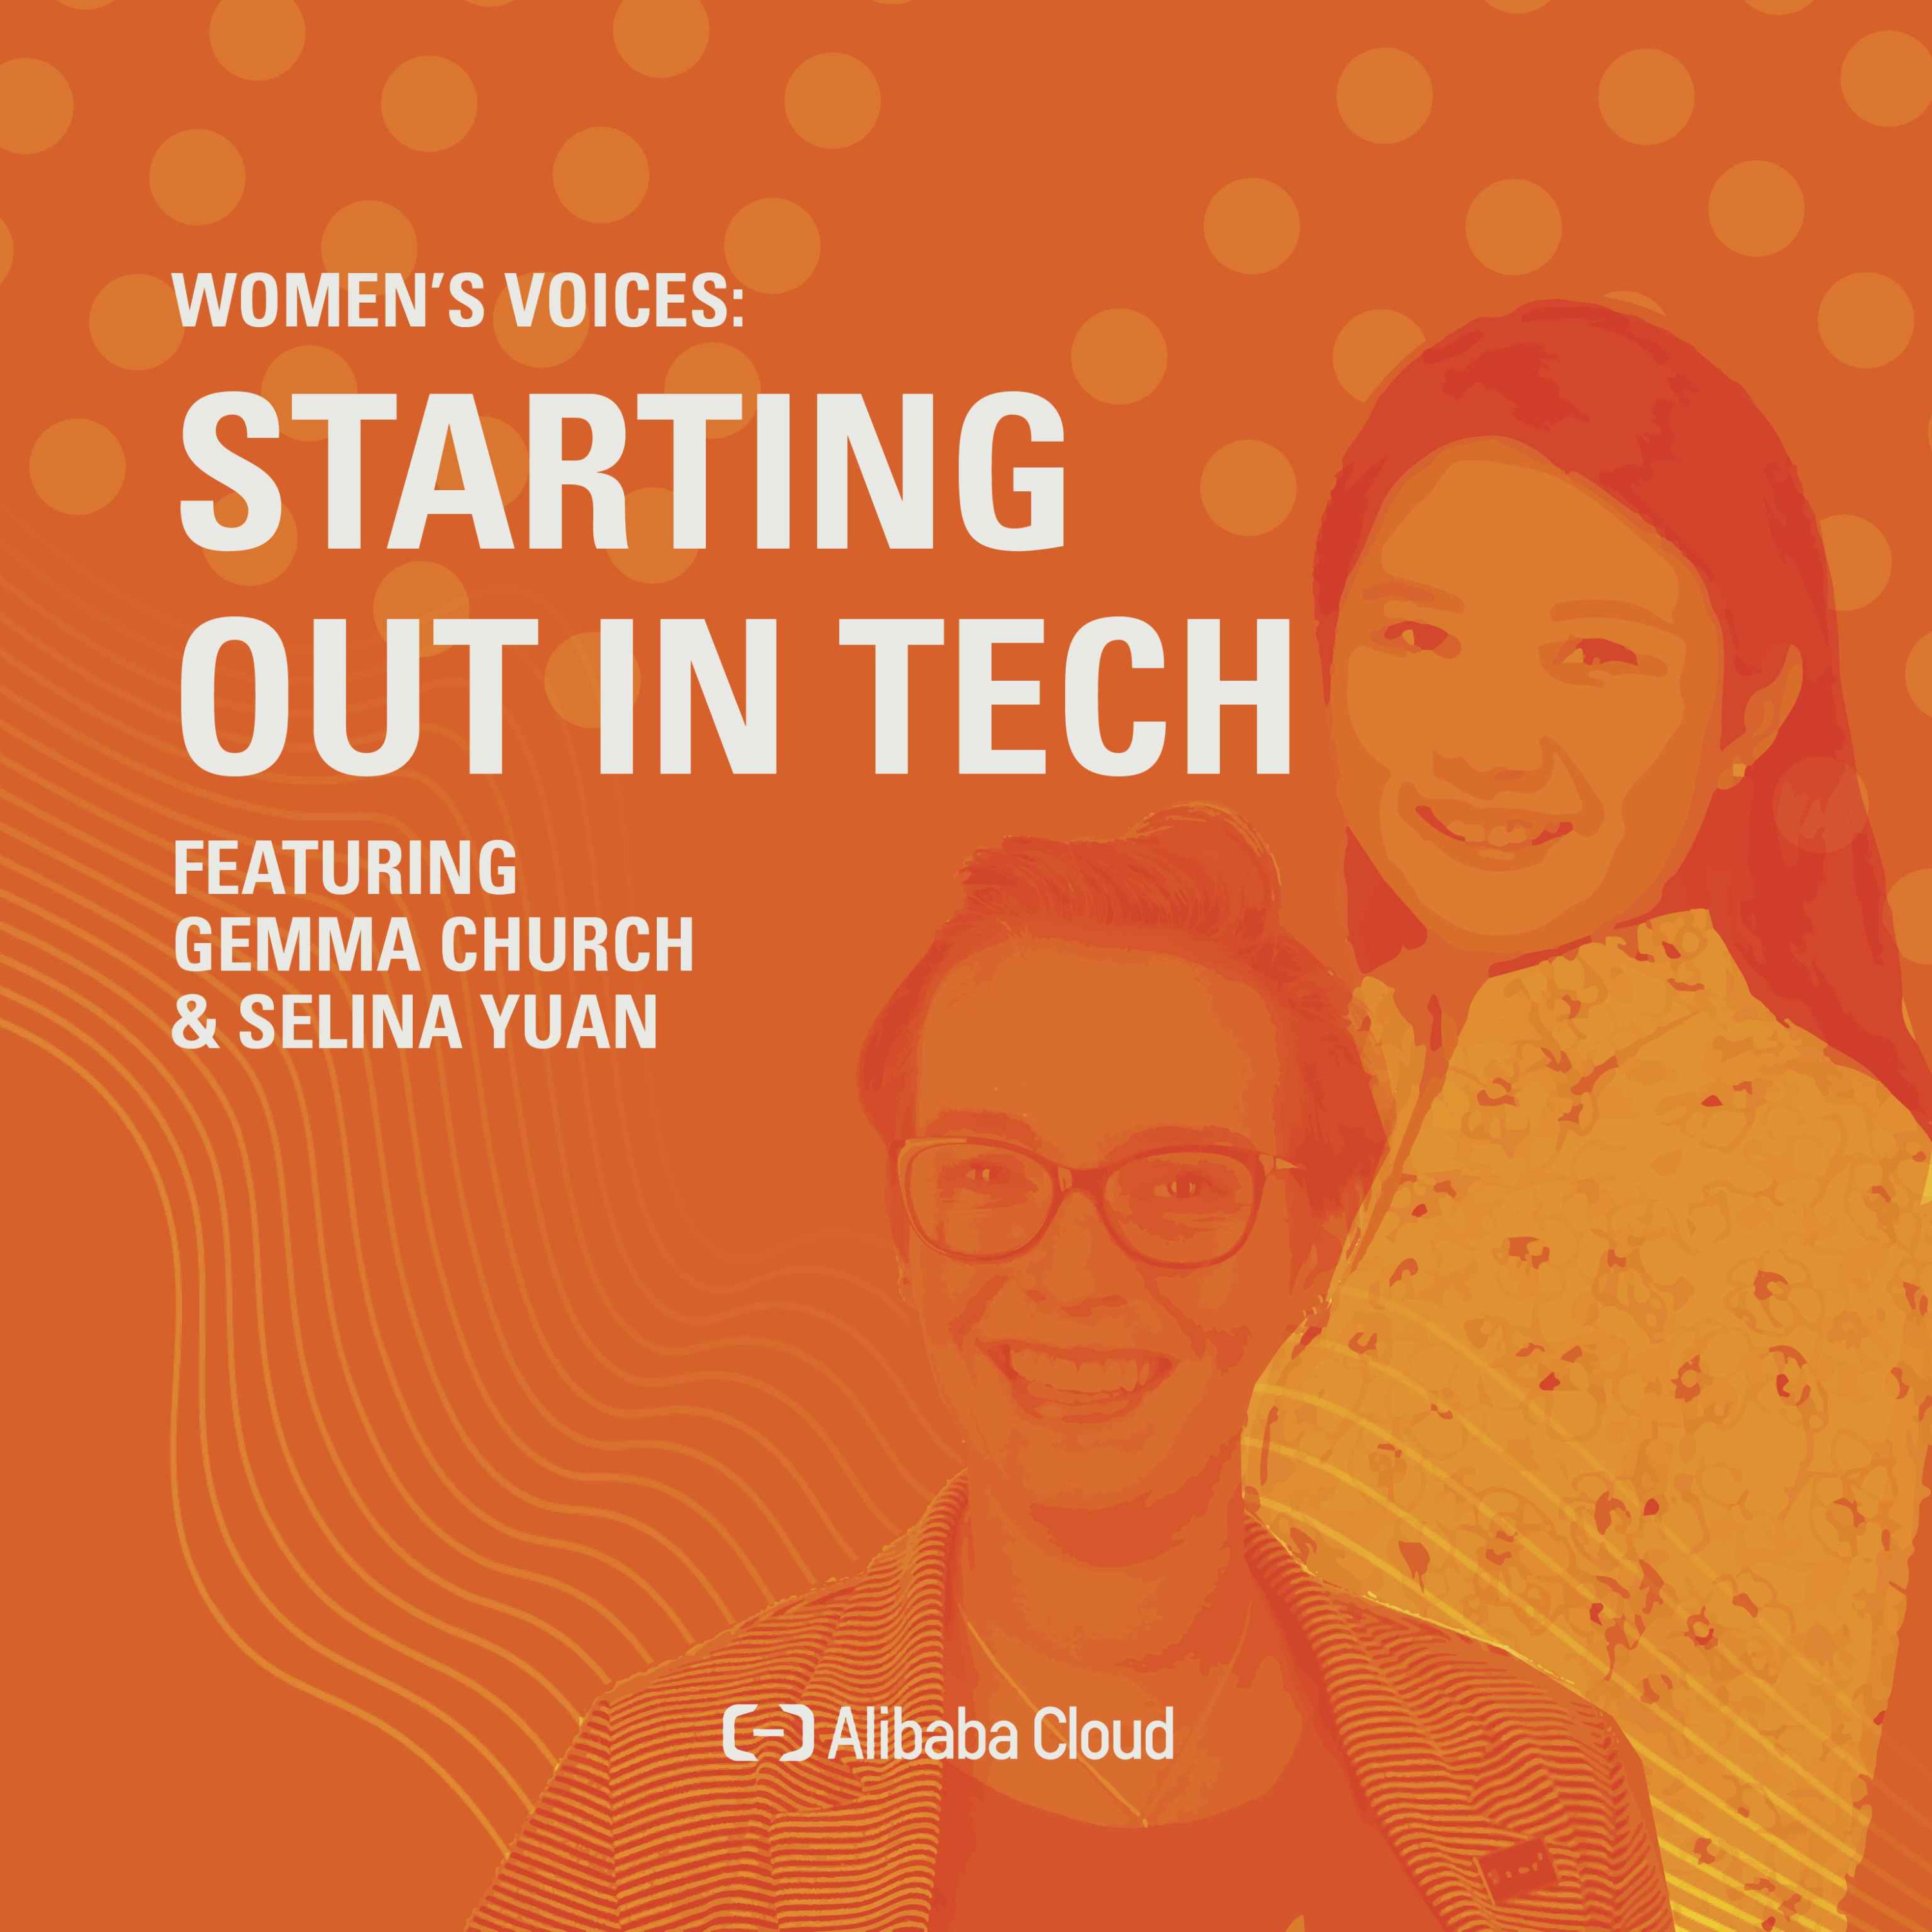 Alibaba Cloud Presents: Women's Voices - Starting out in Tech